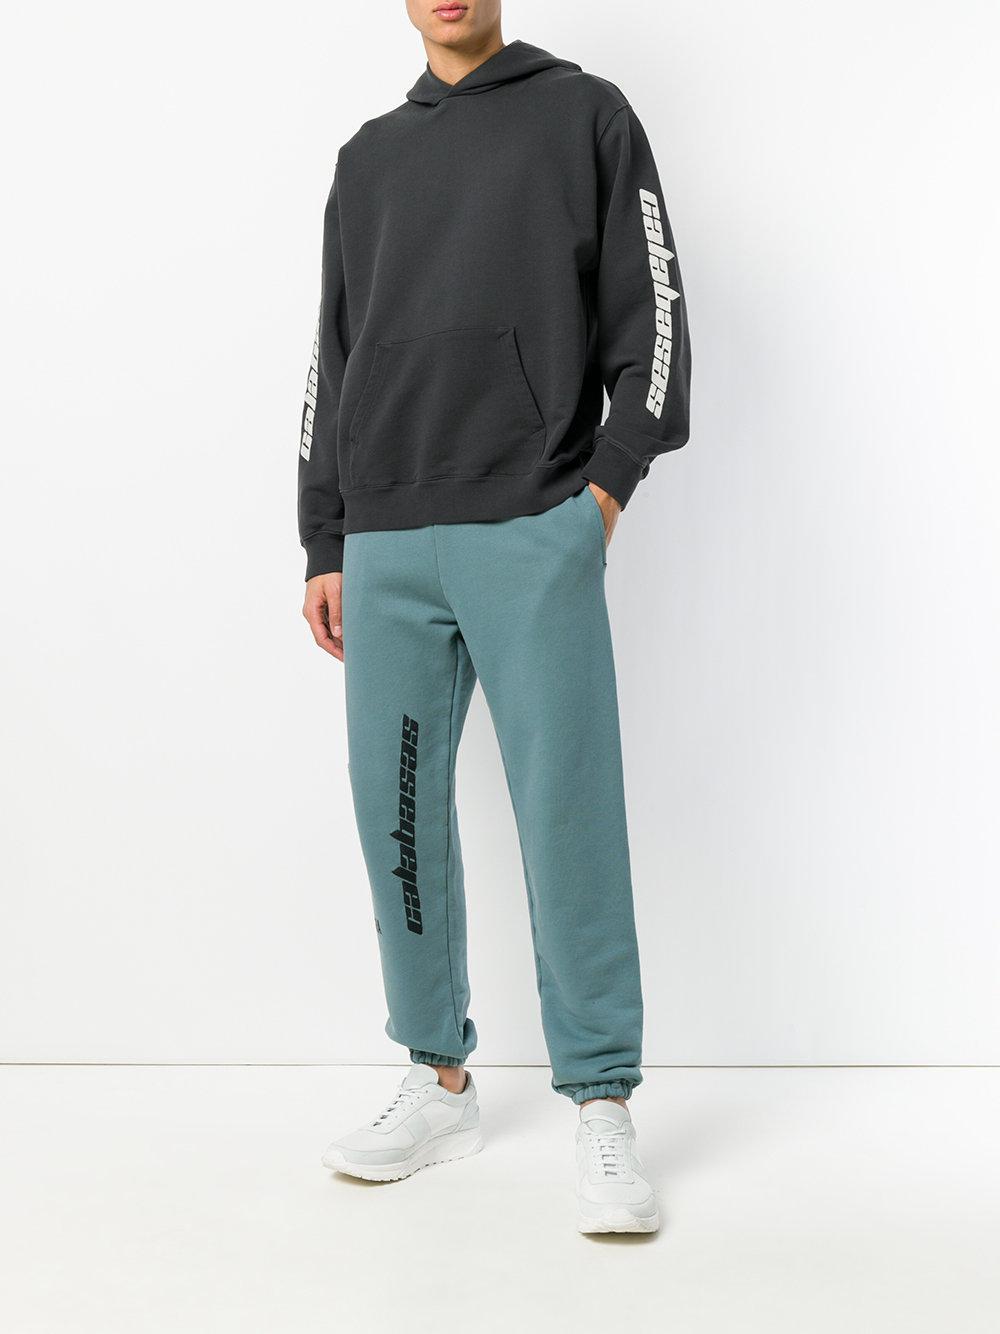 Yeezy Calabasas Embroidered French Terry Pant Clearance, 52% OFF |  www.ingeniovirtual.com